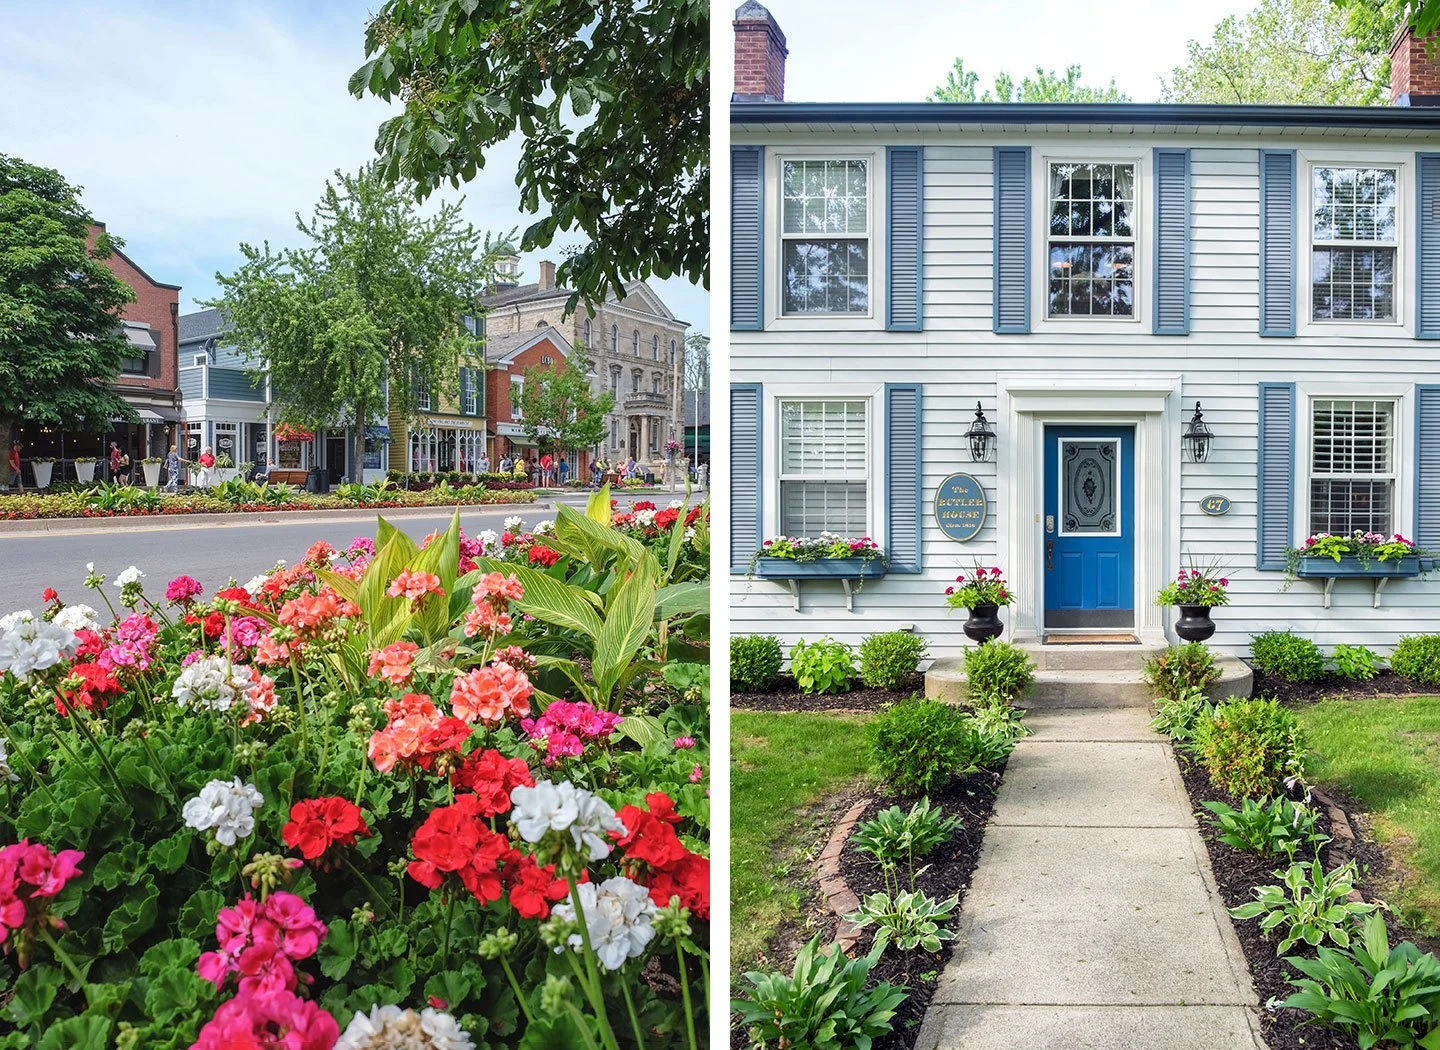 Colourful flowers and historic houses in Niagara on the Lake